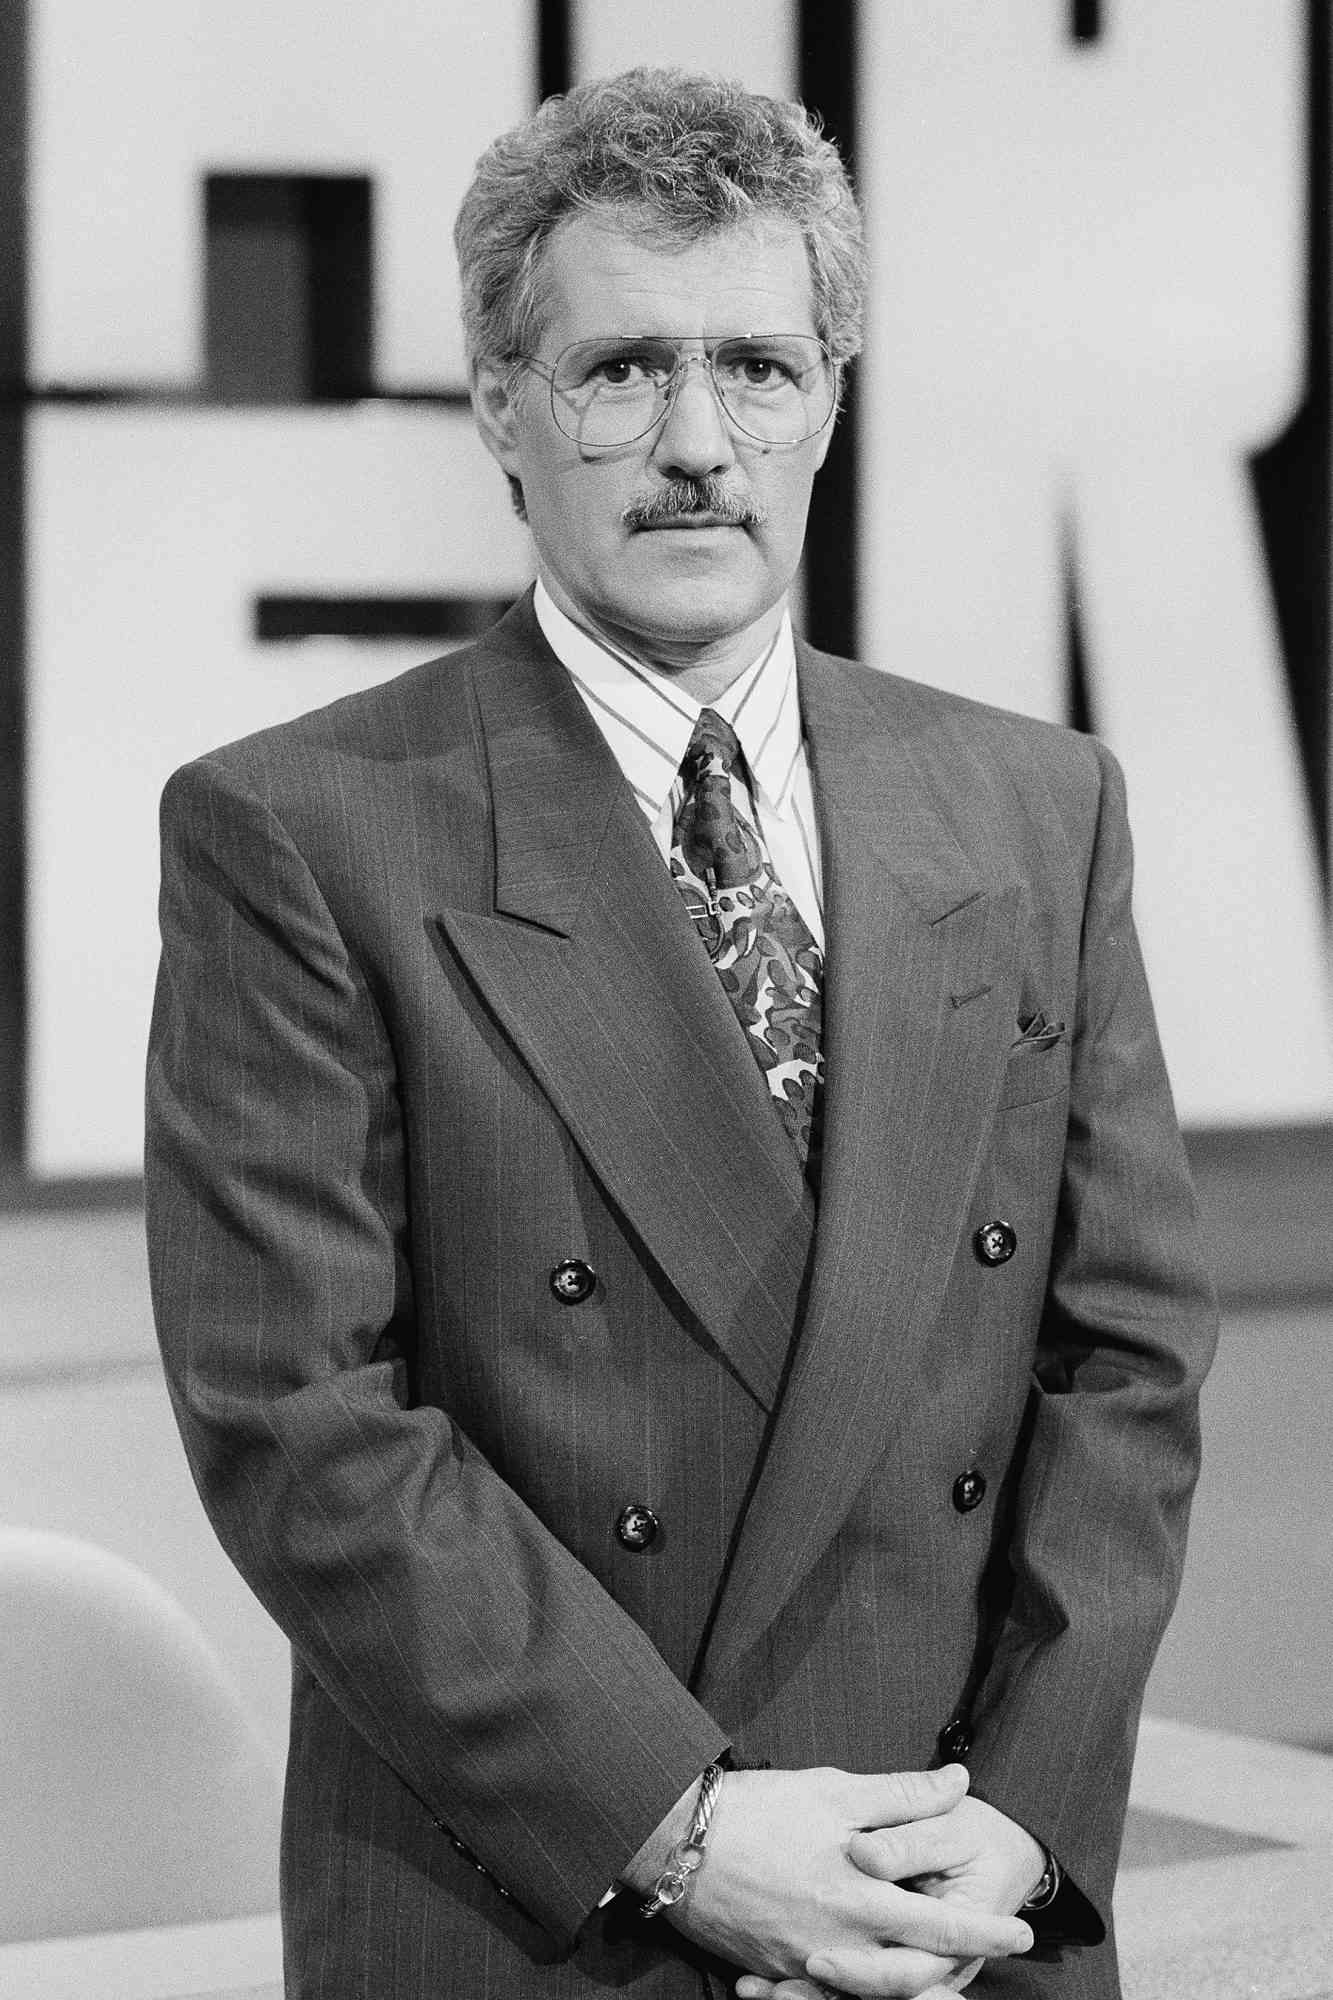 Alex Trebek on To Tell the Truth in 1991